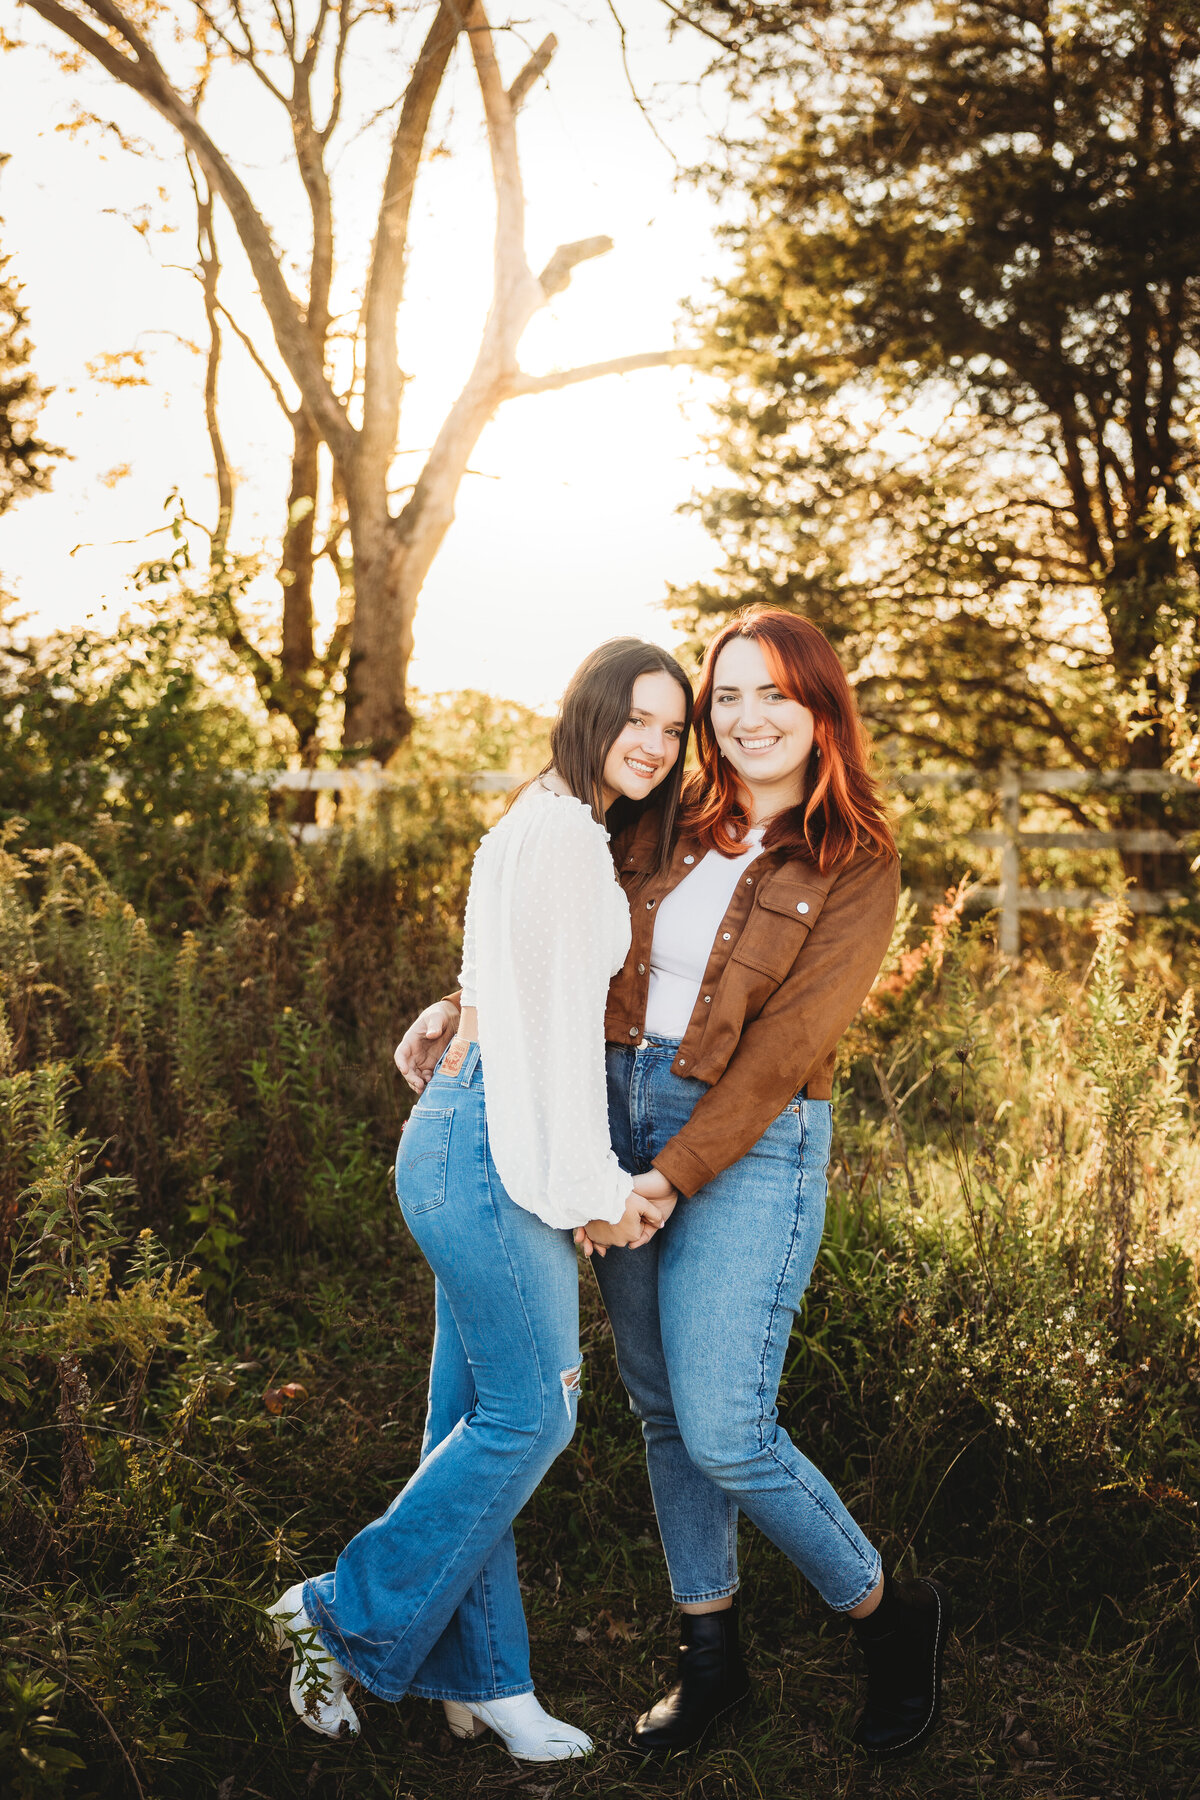 A redheaded and a brunette woman embrace in front of trees